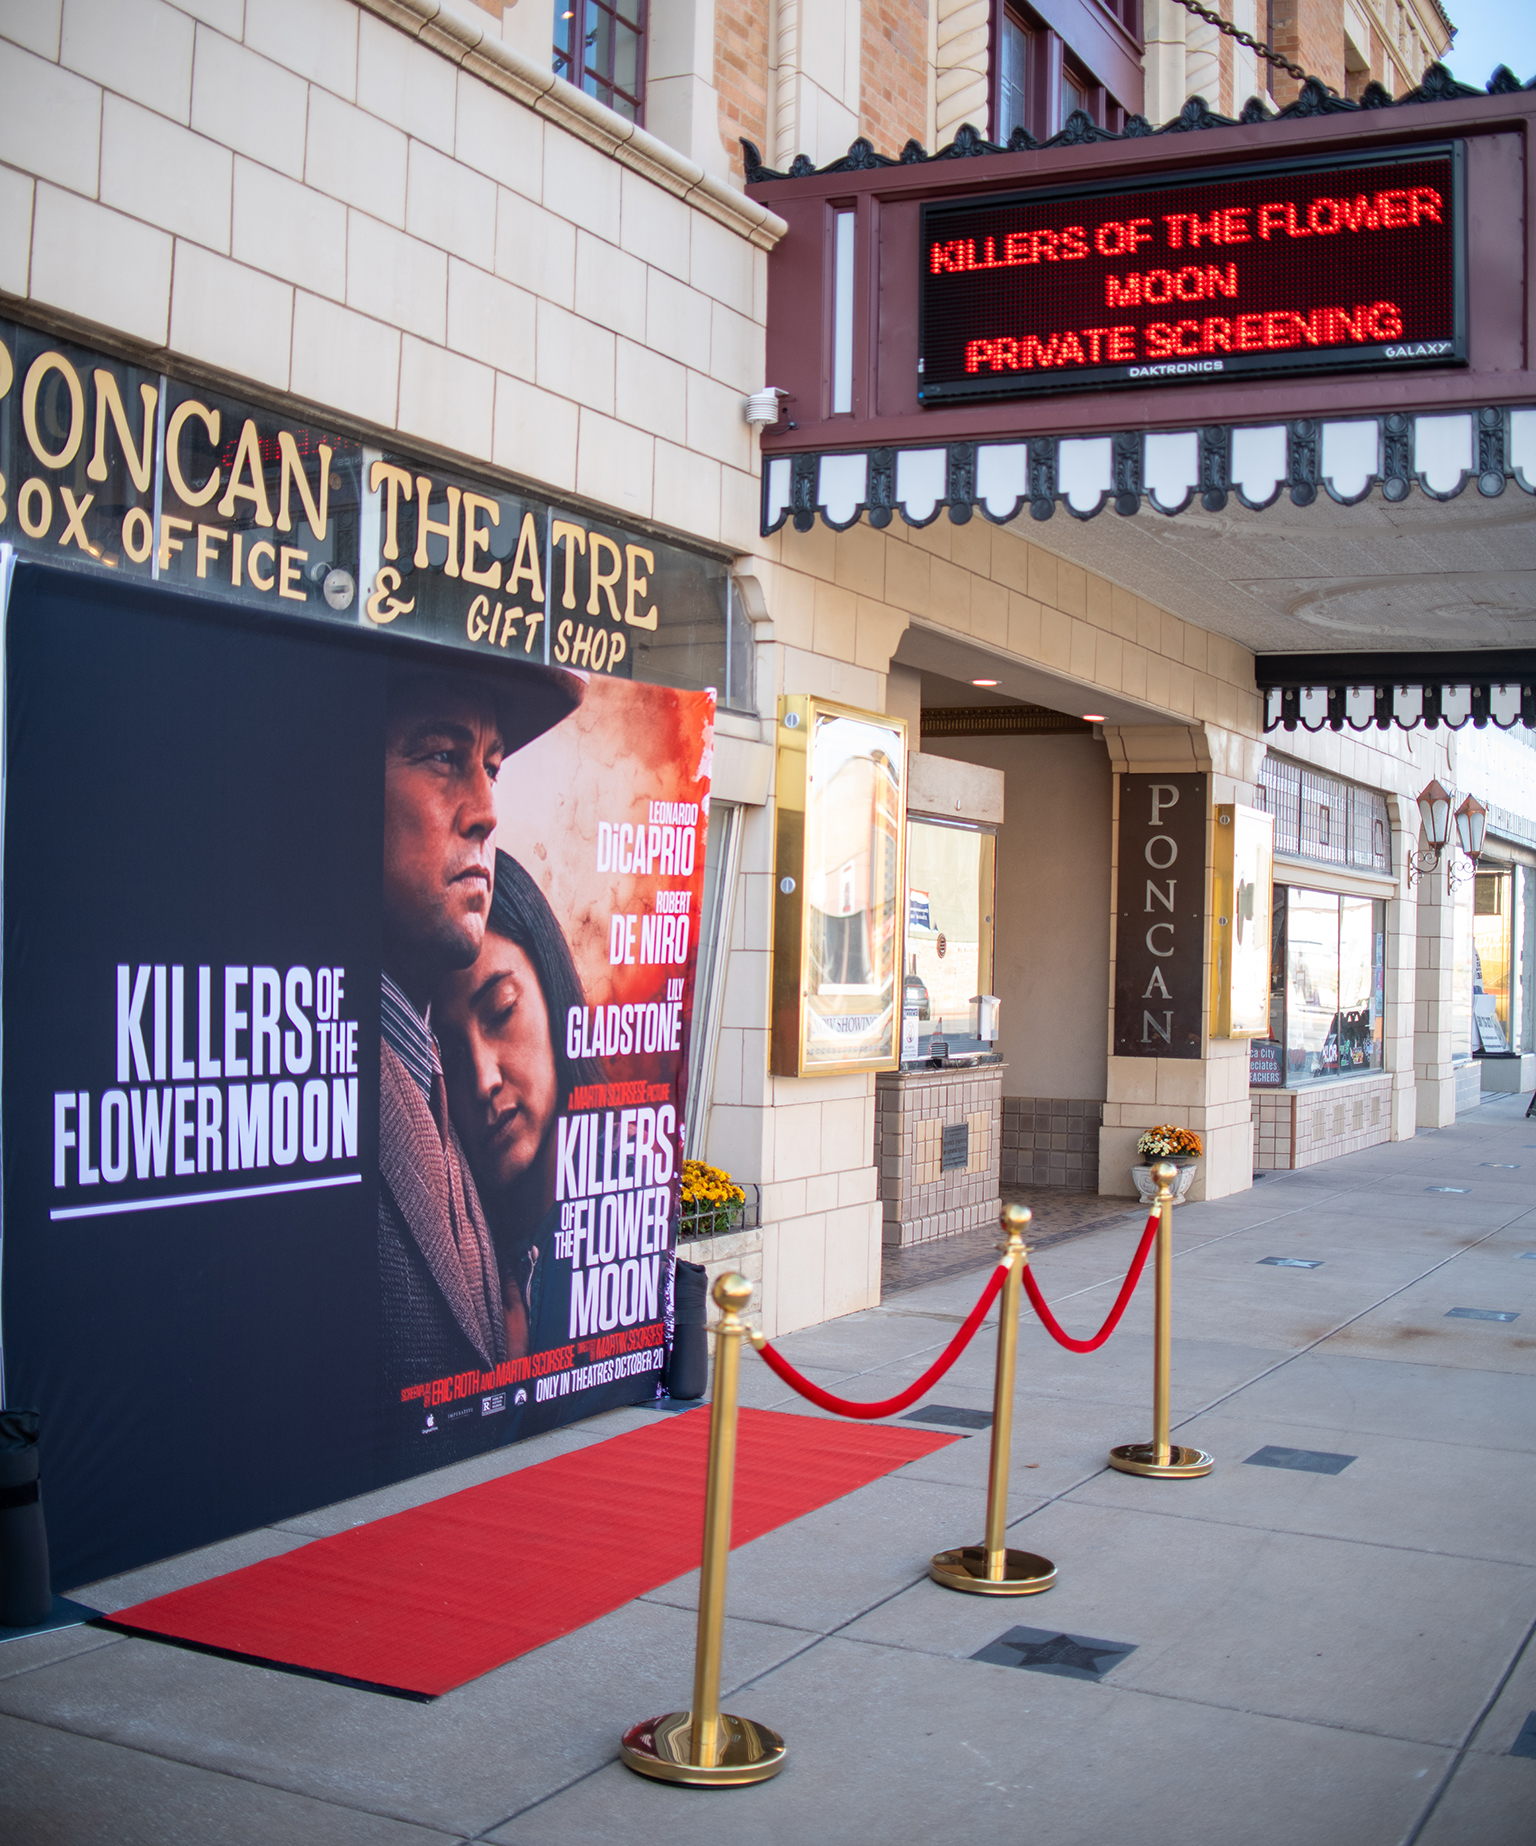 NOC Lectureship Series Hosts Private Screening of Killers of the Flower Moon in Ponca City